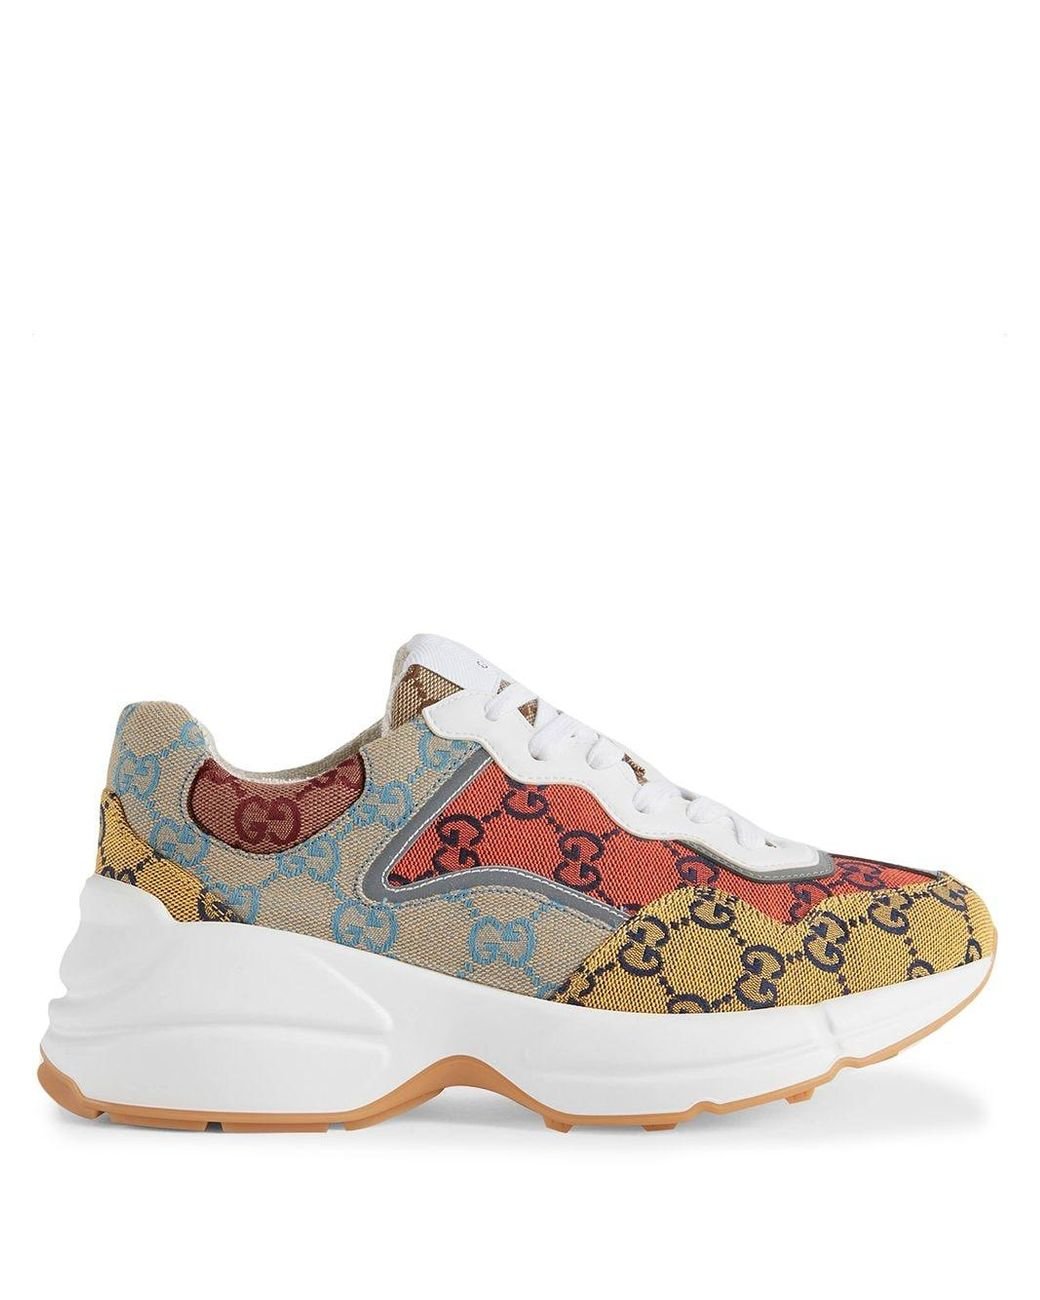 Gucci Canvas Rhyton GG Multicolour Sneakers in Yellow - Lyst